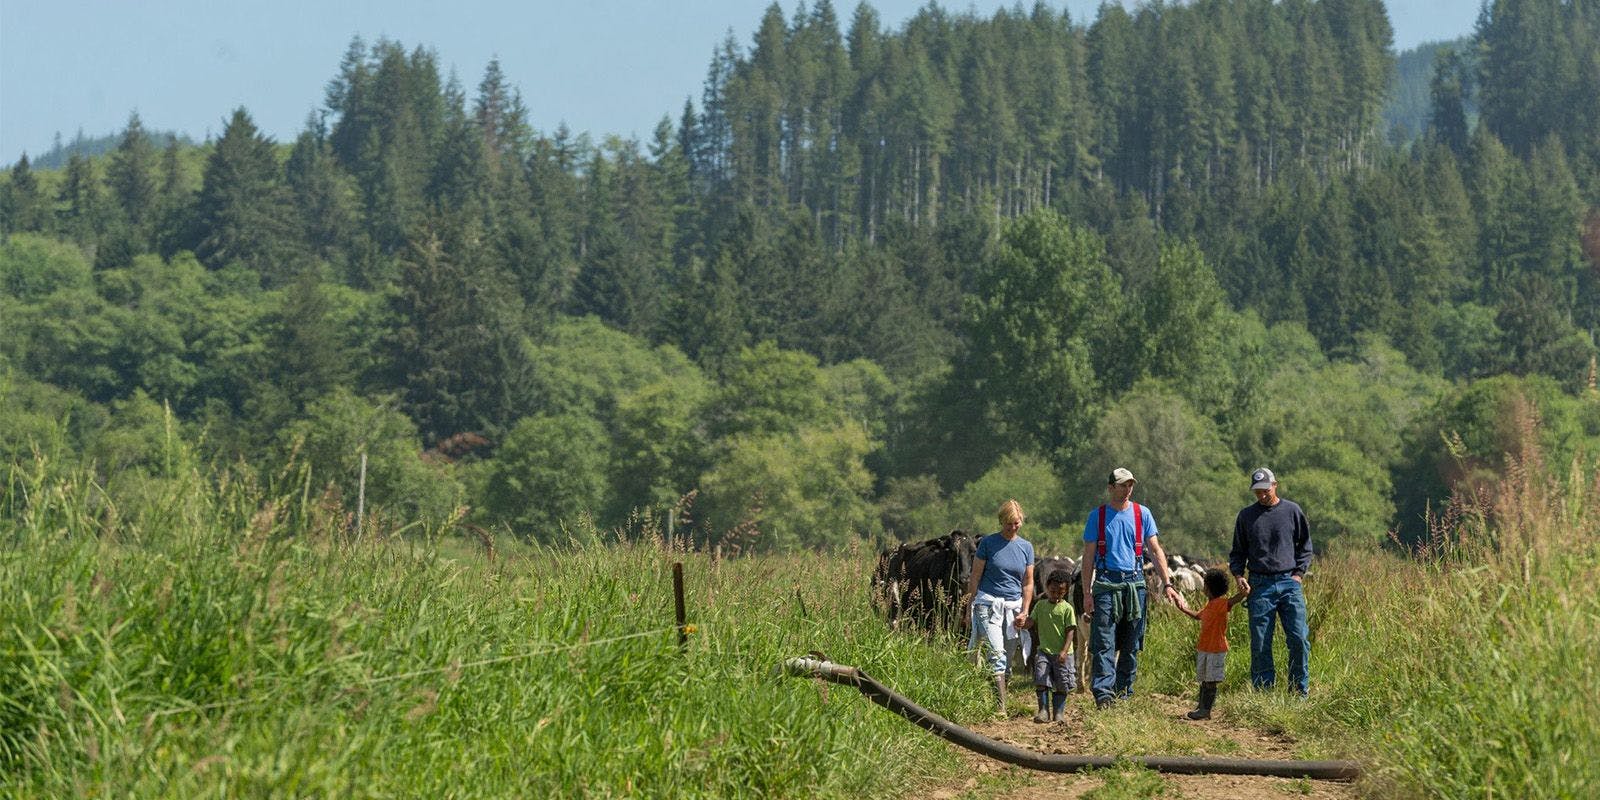 The Burkhalter family walks through grasses and trees stand in the background at their organic farm in Washington